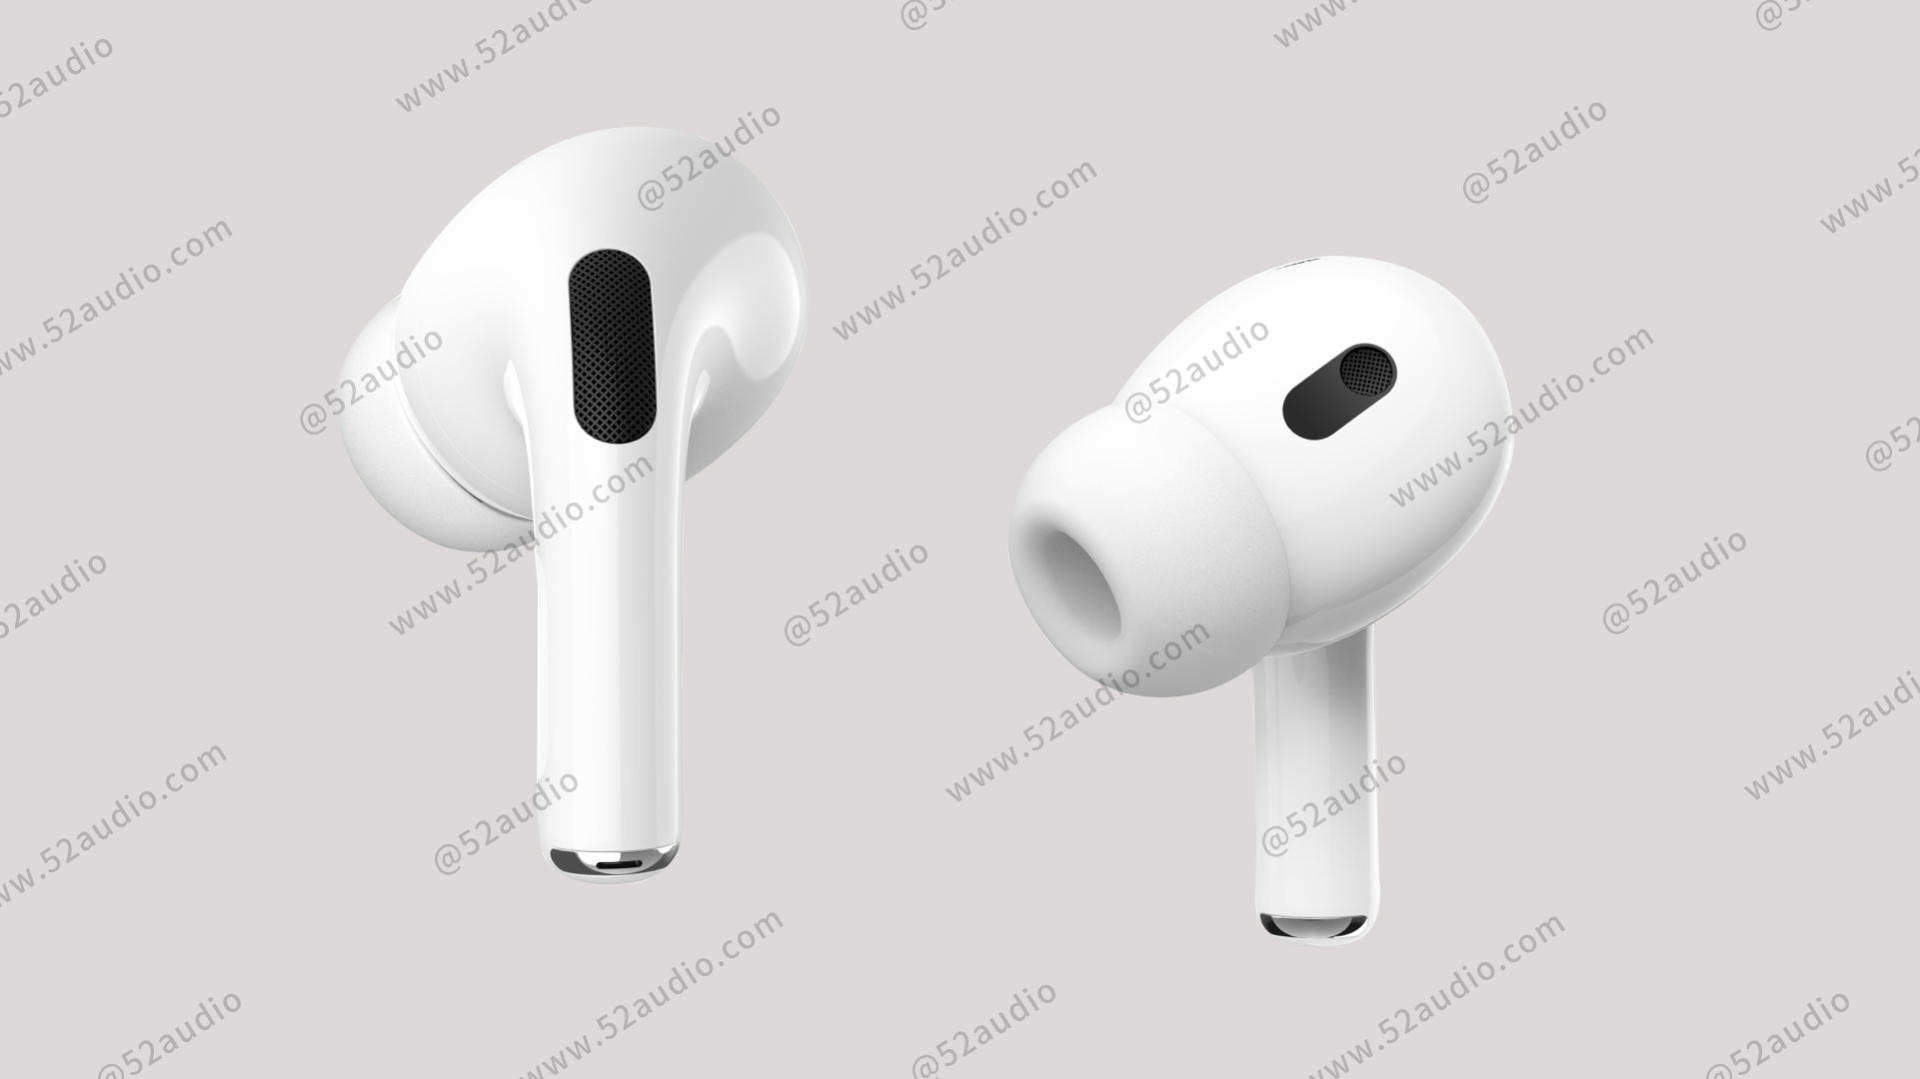 52audio Got New Info on the Apple AirPods Pro 2-我爱音频网